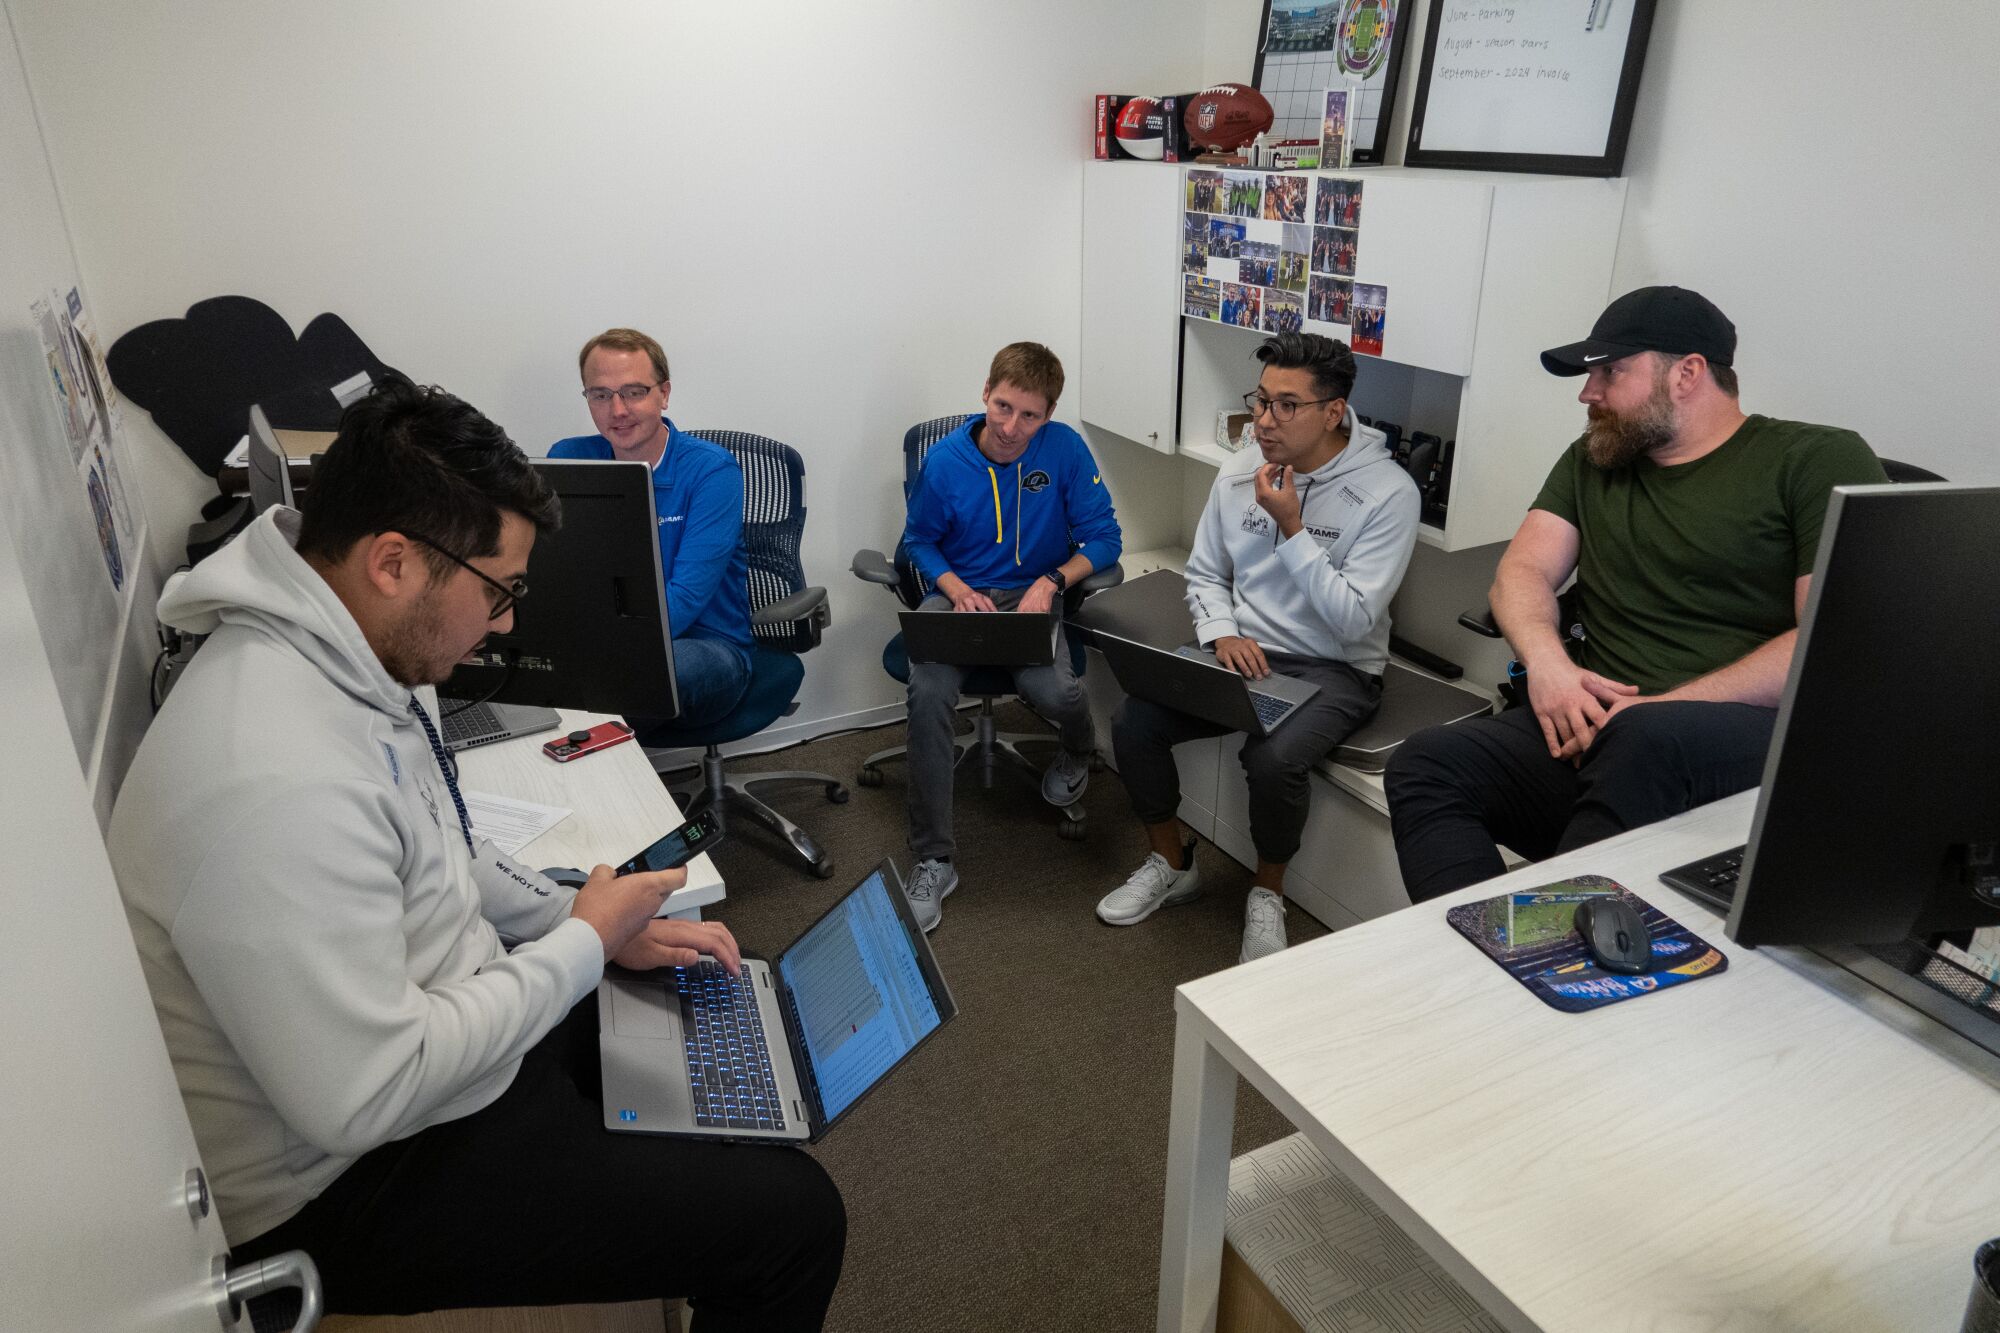 Rams employees hold a team meeting and talk while looking at computer screens.